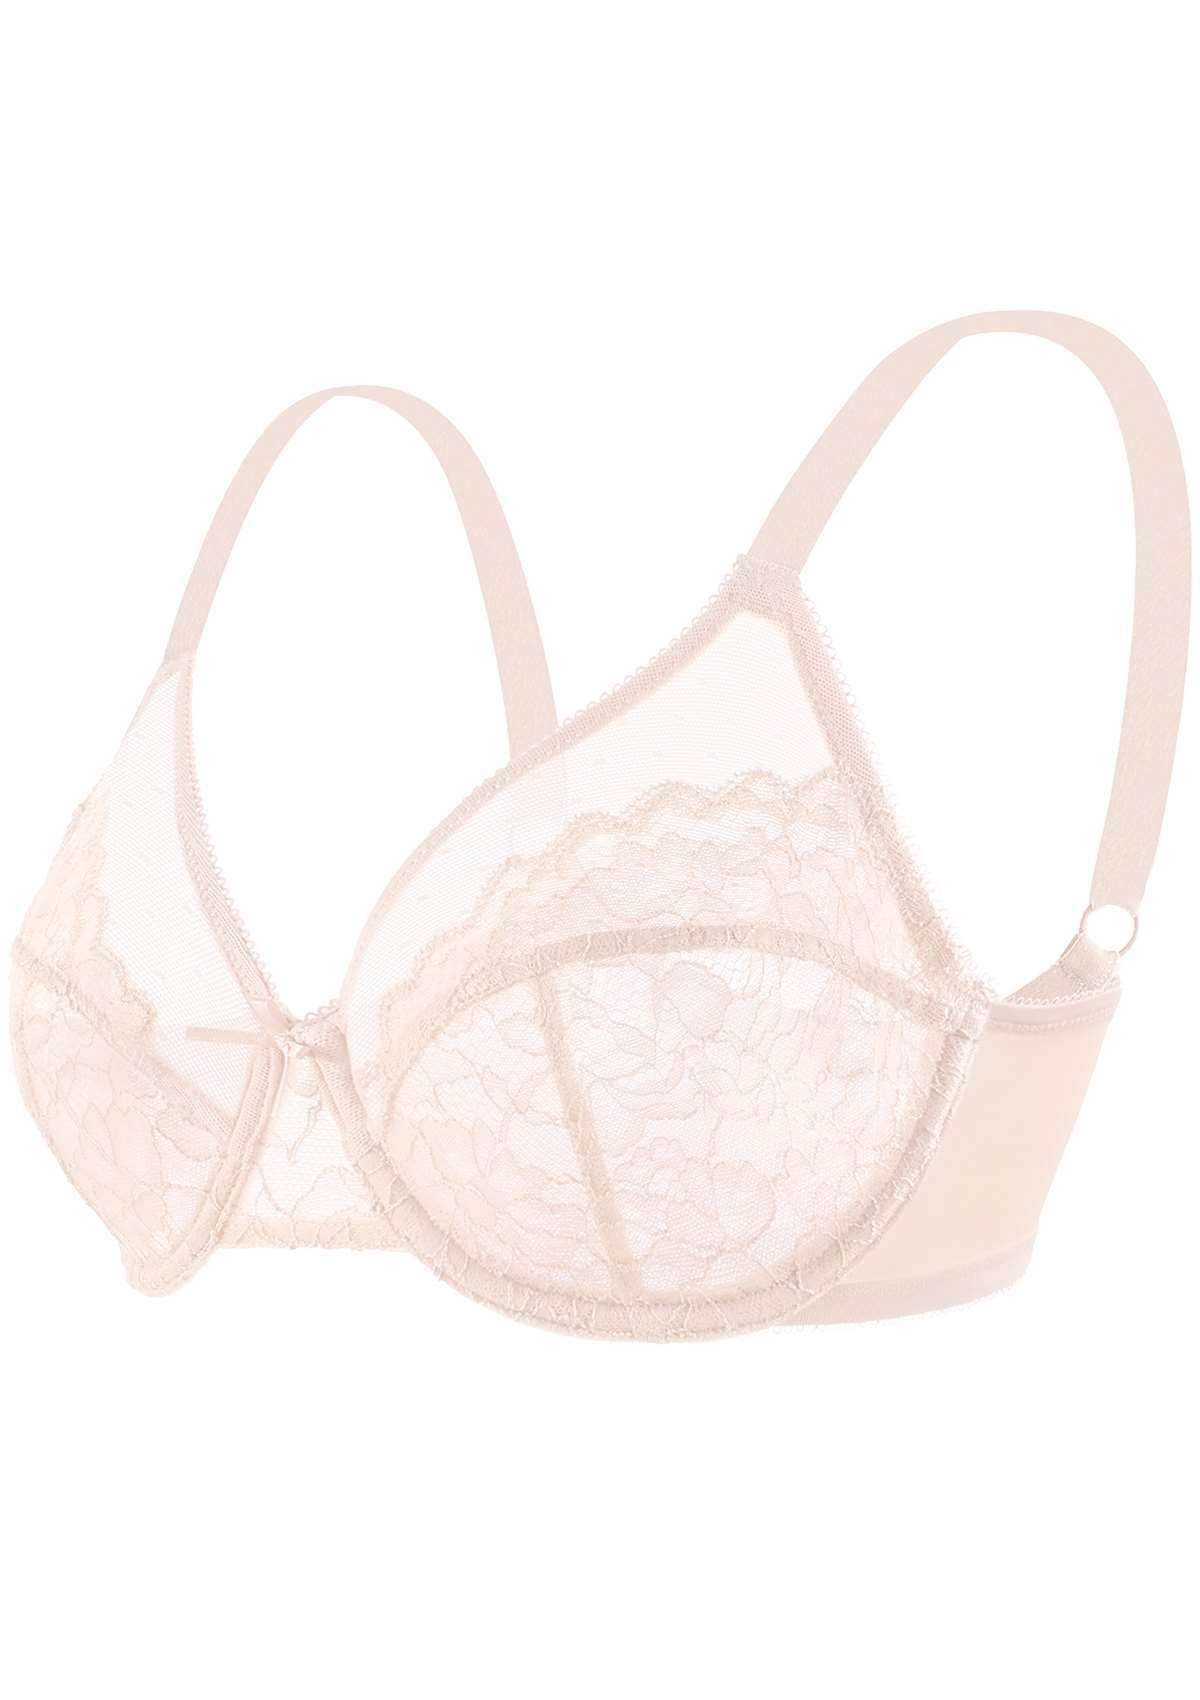 HSIA Enchante Lacy Bra: Comfy Sheer Lace Bra With Lift - Pink / 40 / DDD/F